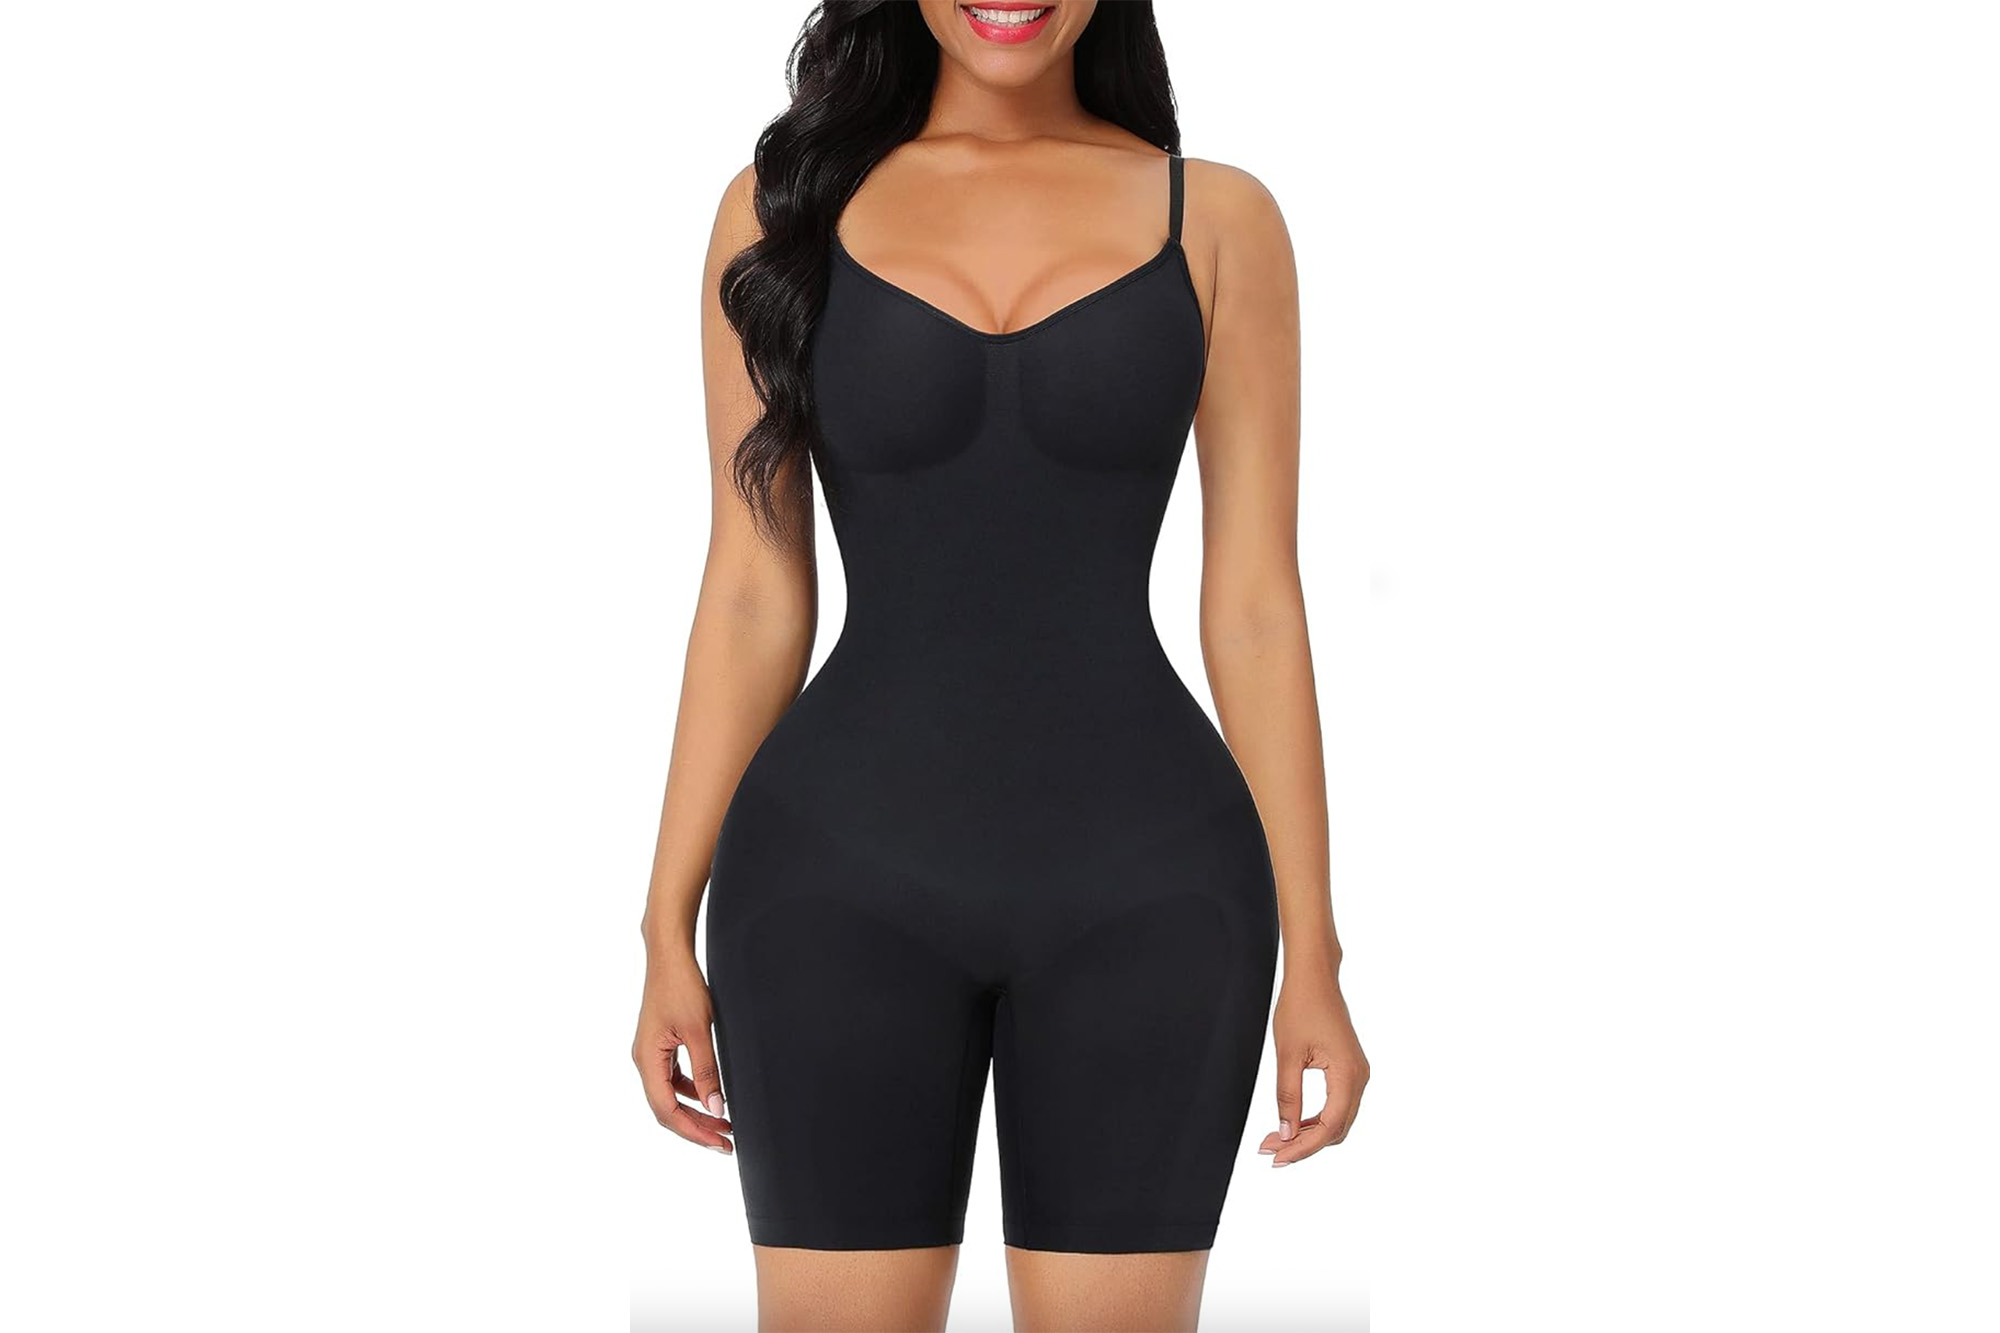 The 18 Best Shapewear Items Under $50 on